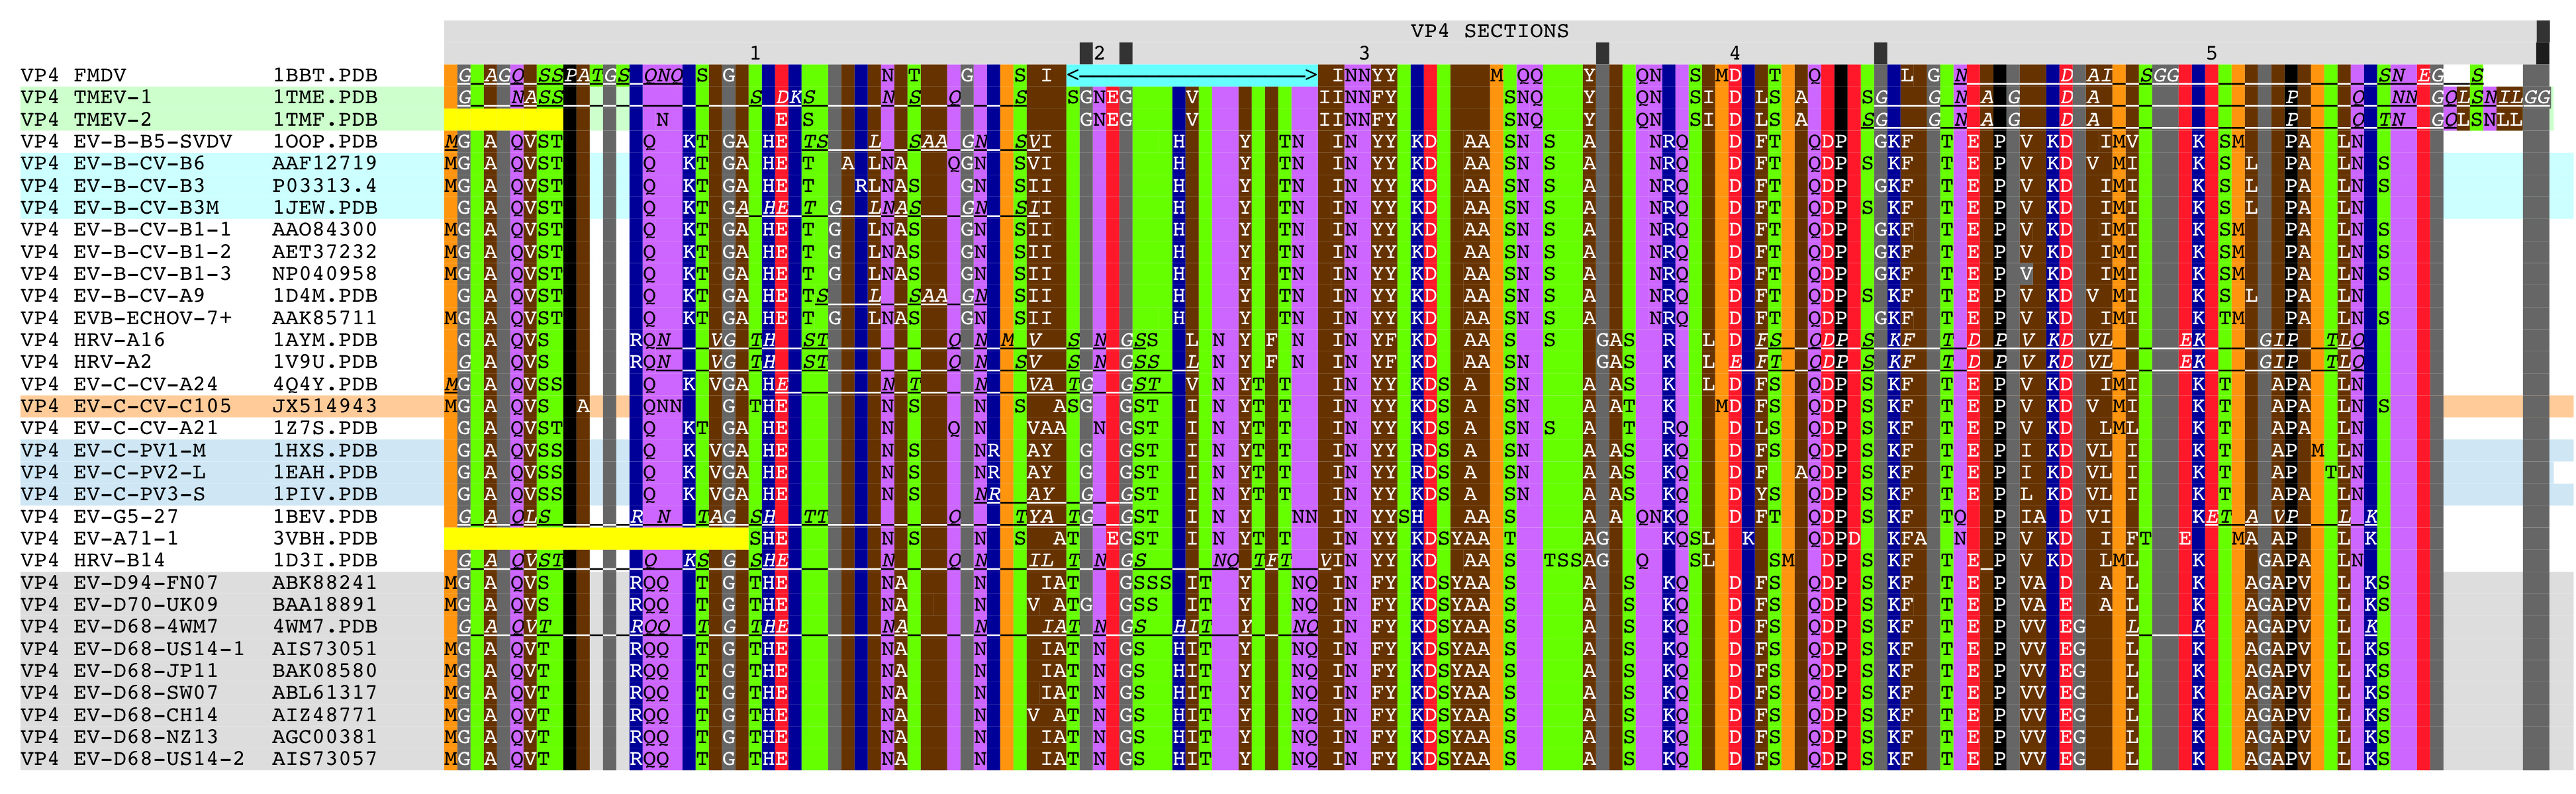 Aligned VP4 sequences.